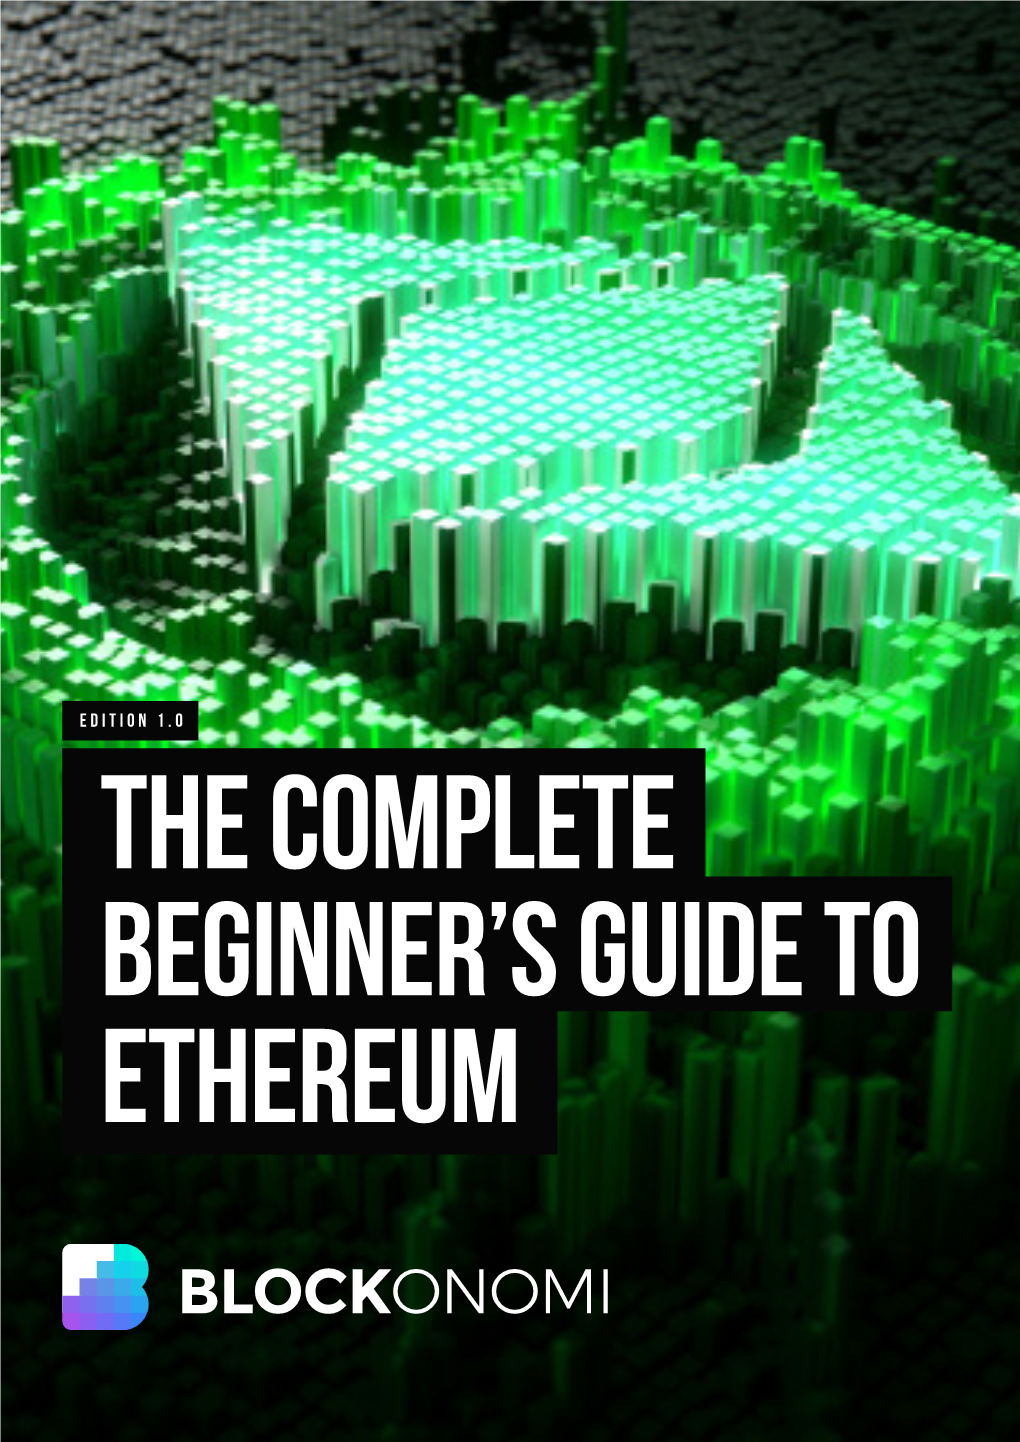 The Complete Beginner's Guide to Ethereum